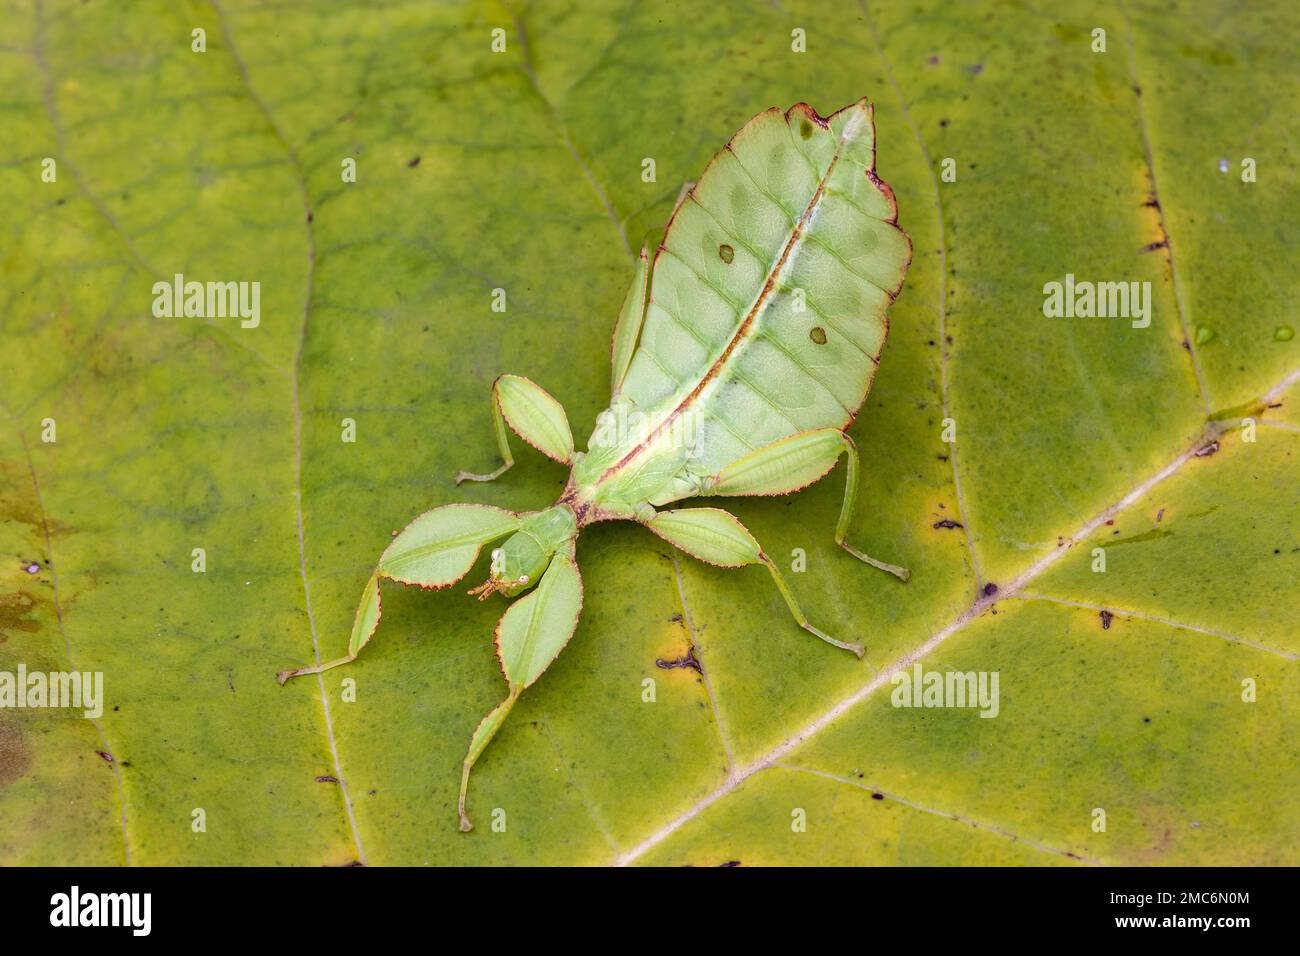 Leaf insect (Phyllium sp) on leaf. Stock Photo